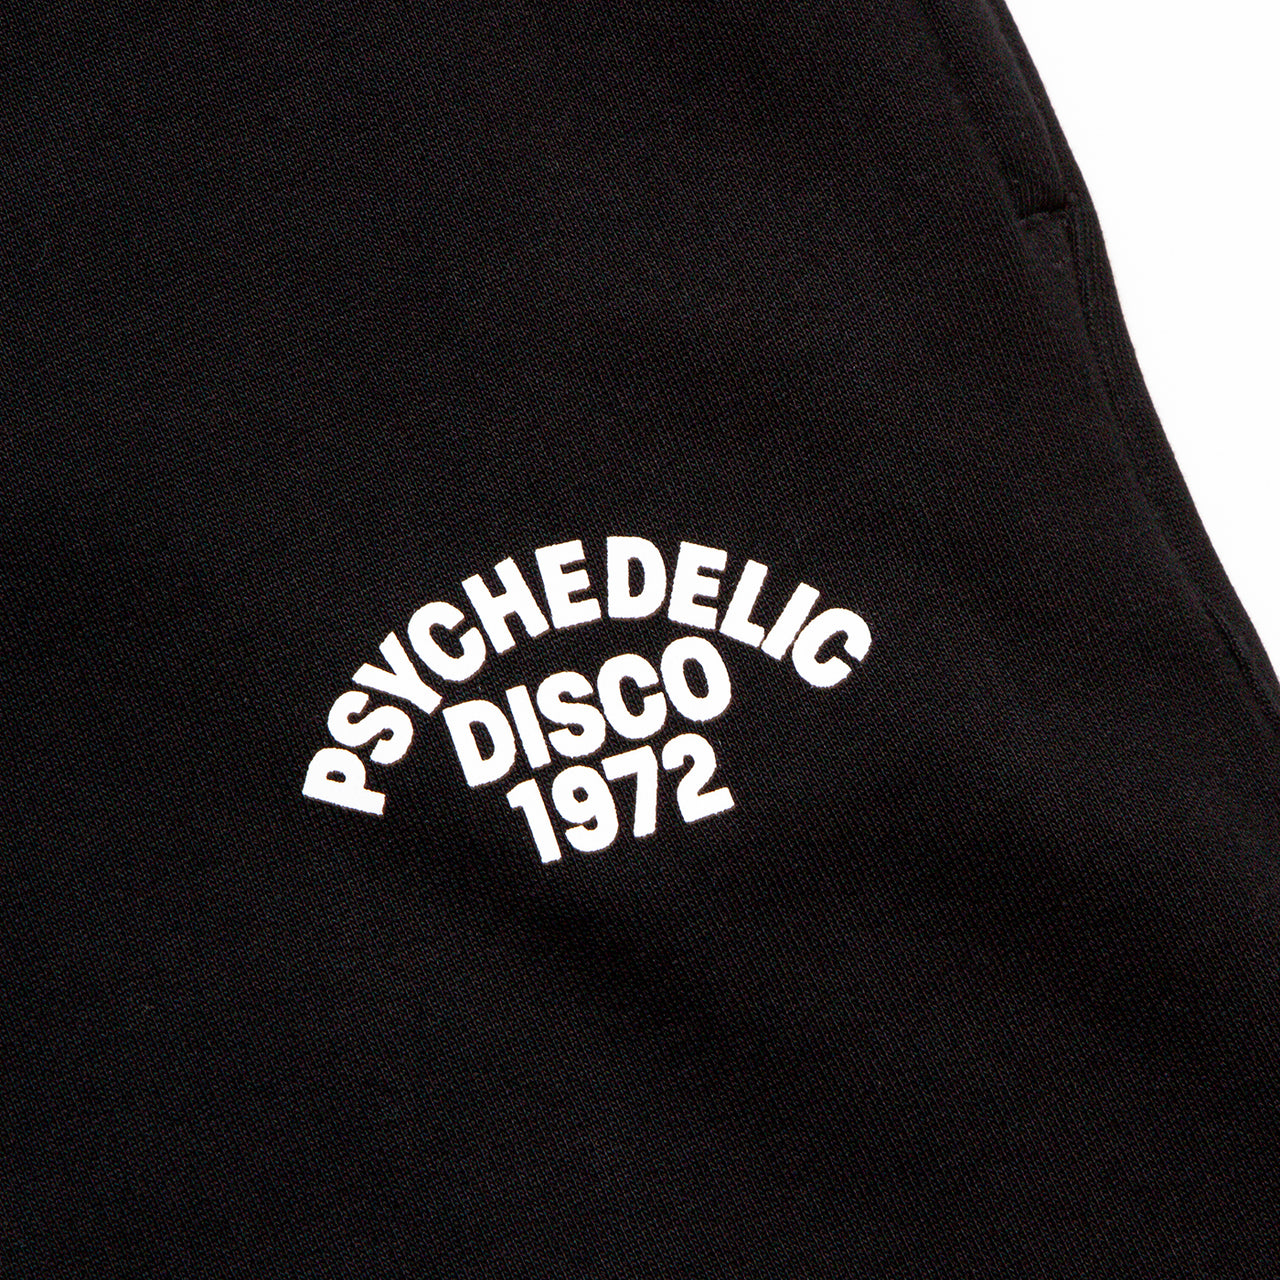 1972 Psychedelic Disco - Joggers - Black